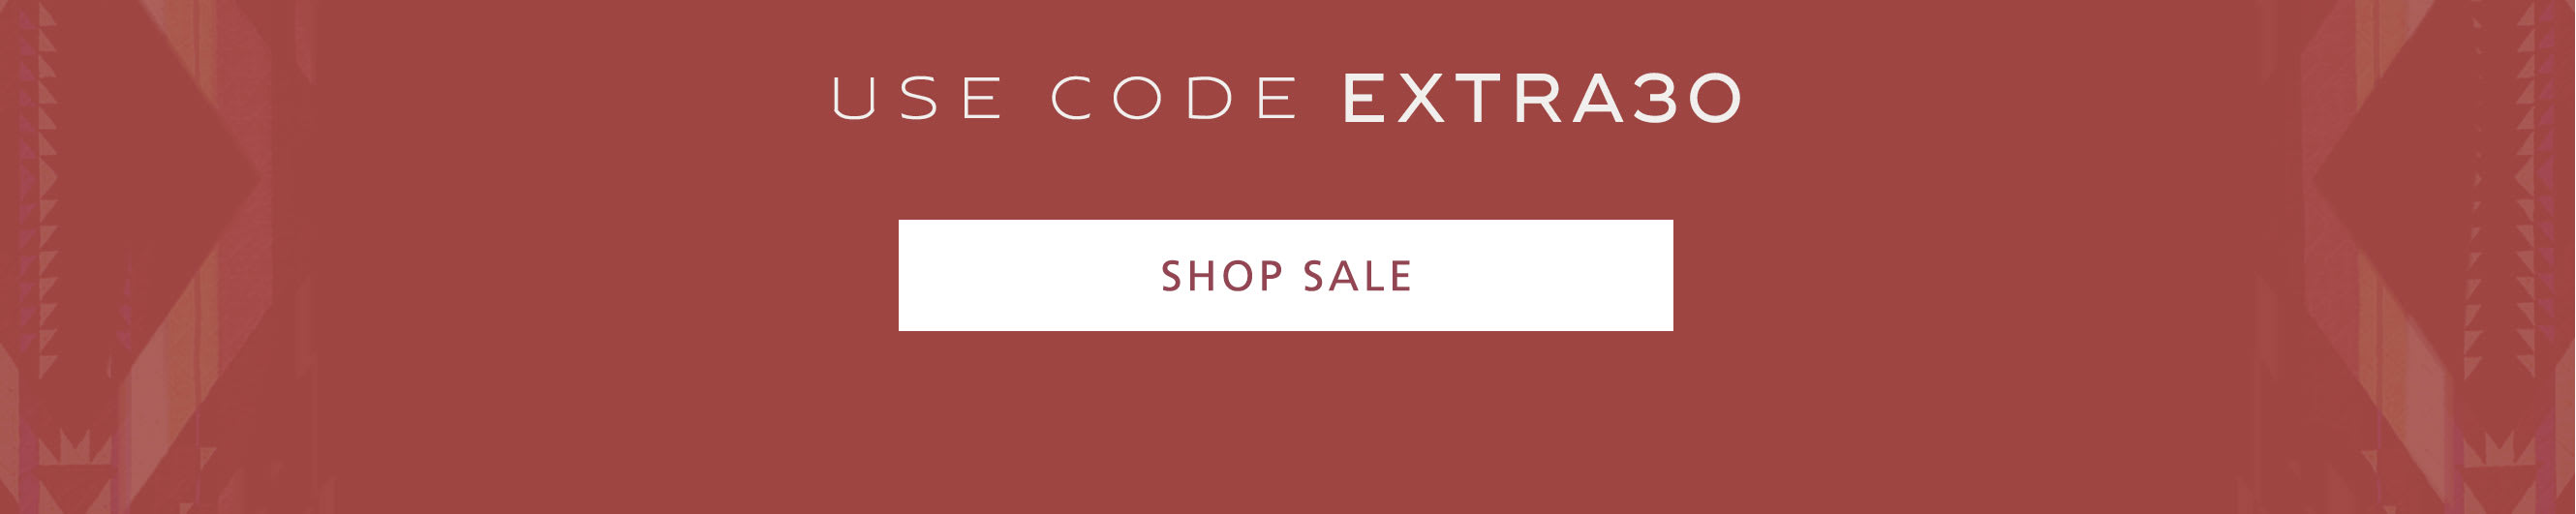 SHOP SALE - USE CODE EXTRA30